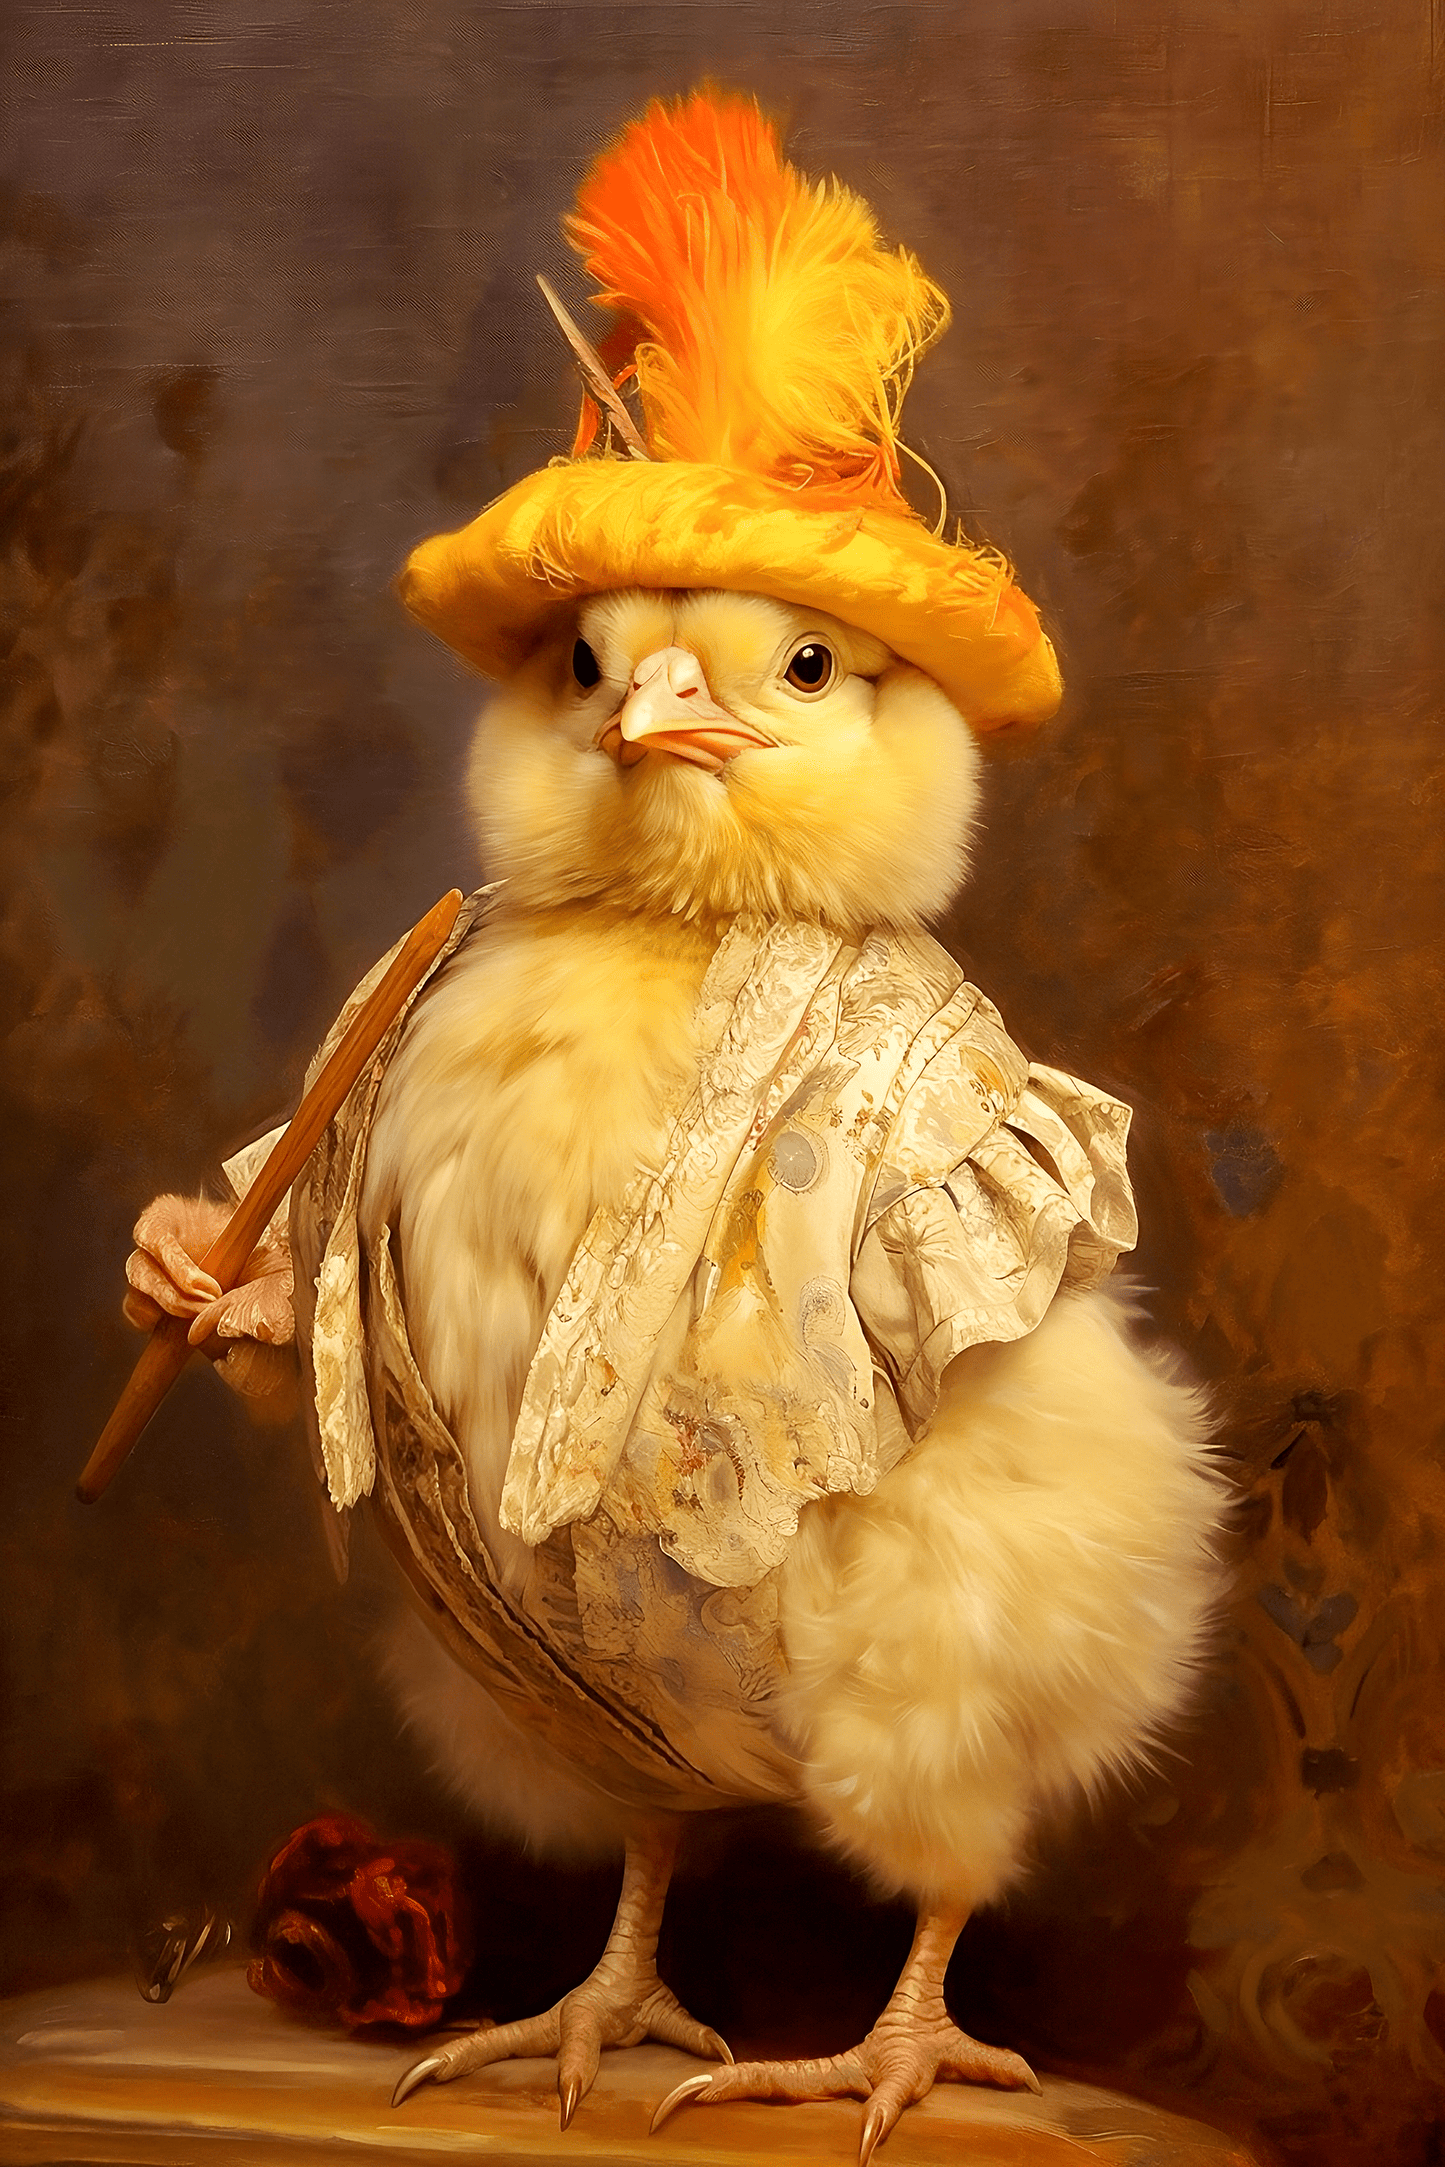 Yellow Baby Chick Renaissance Art Print | Funny Chicken Art from The Curated Goose